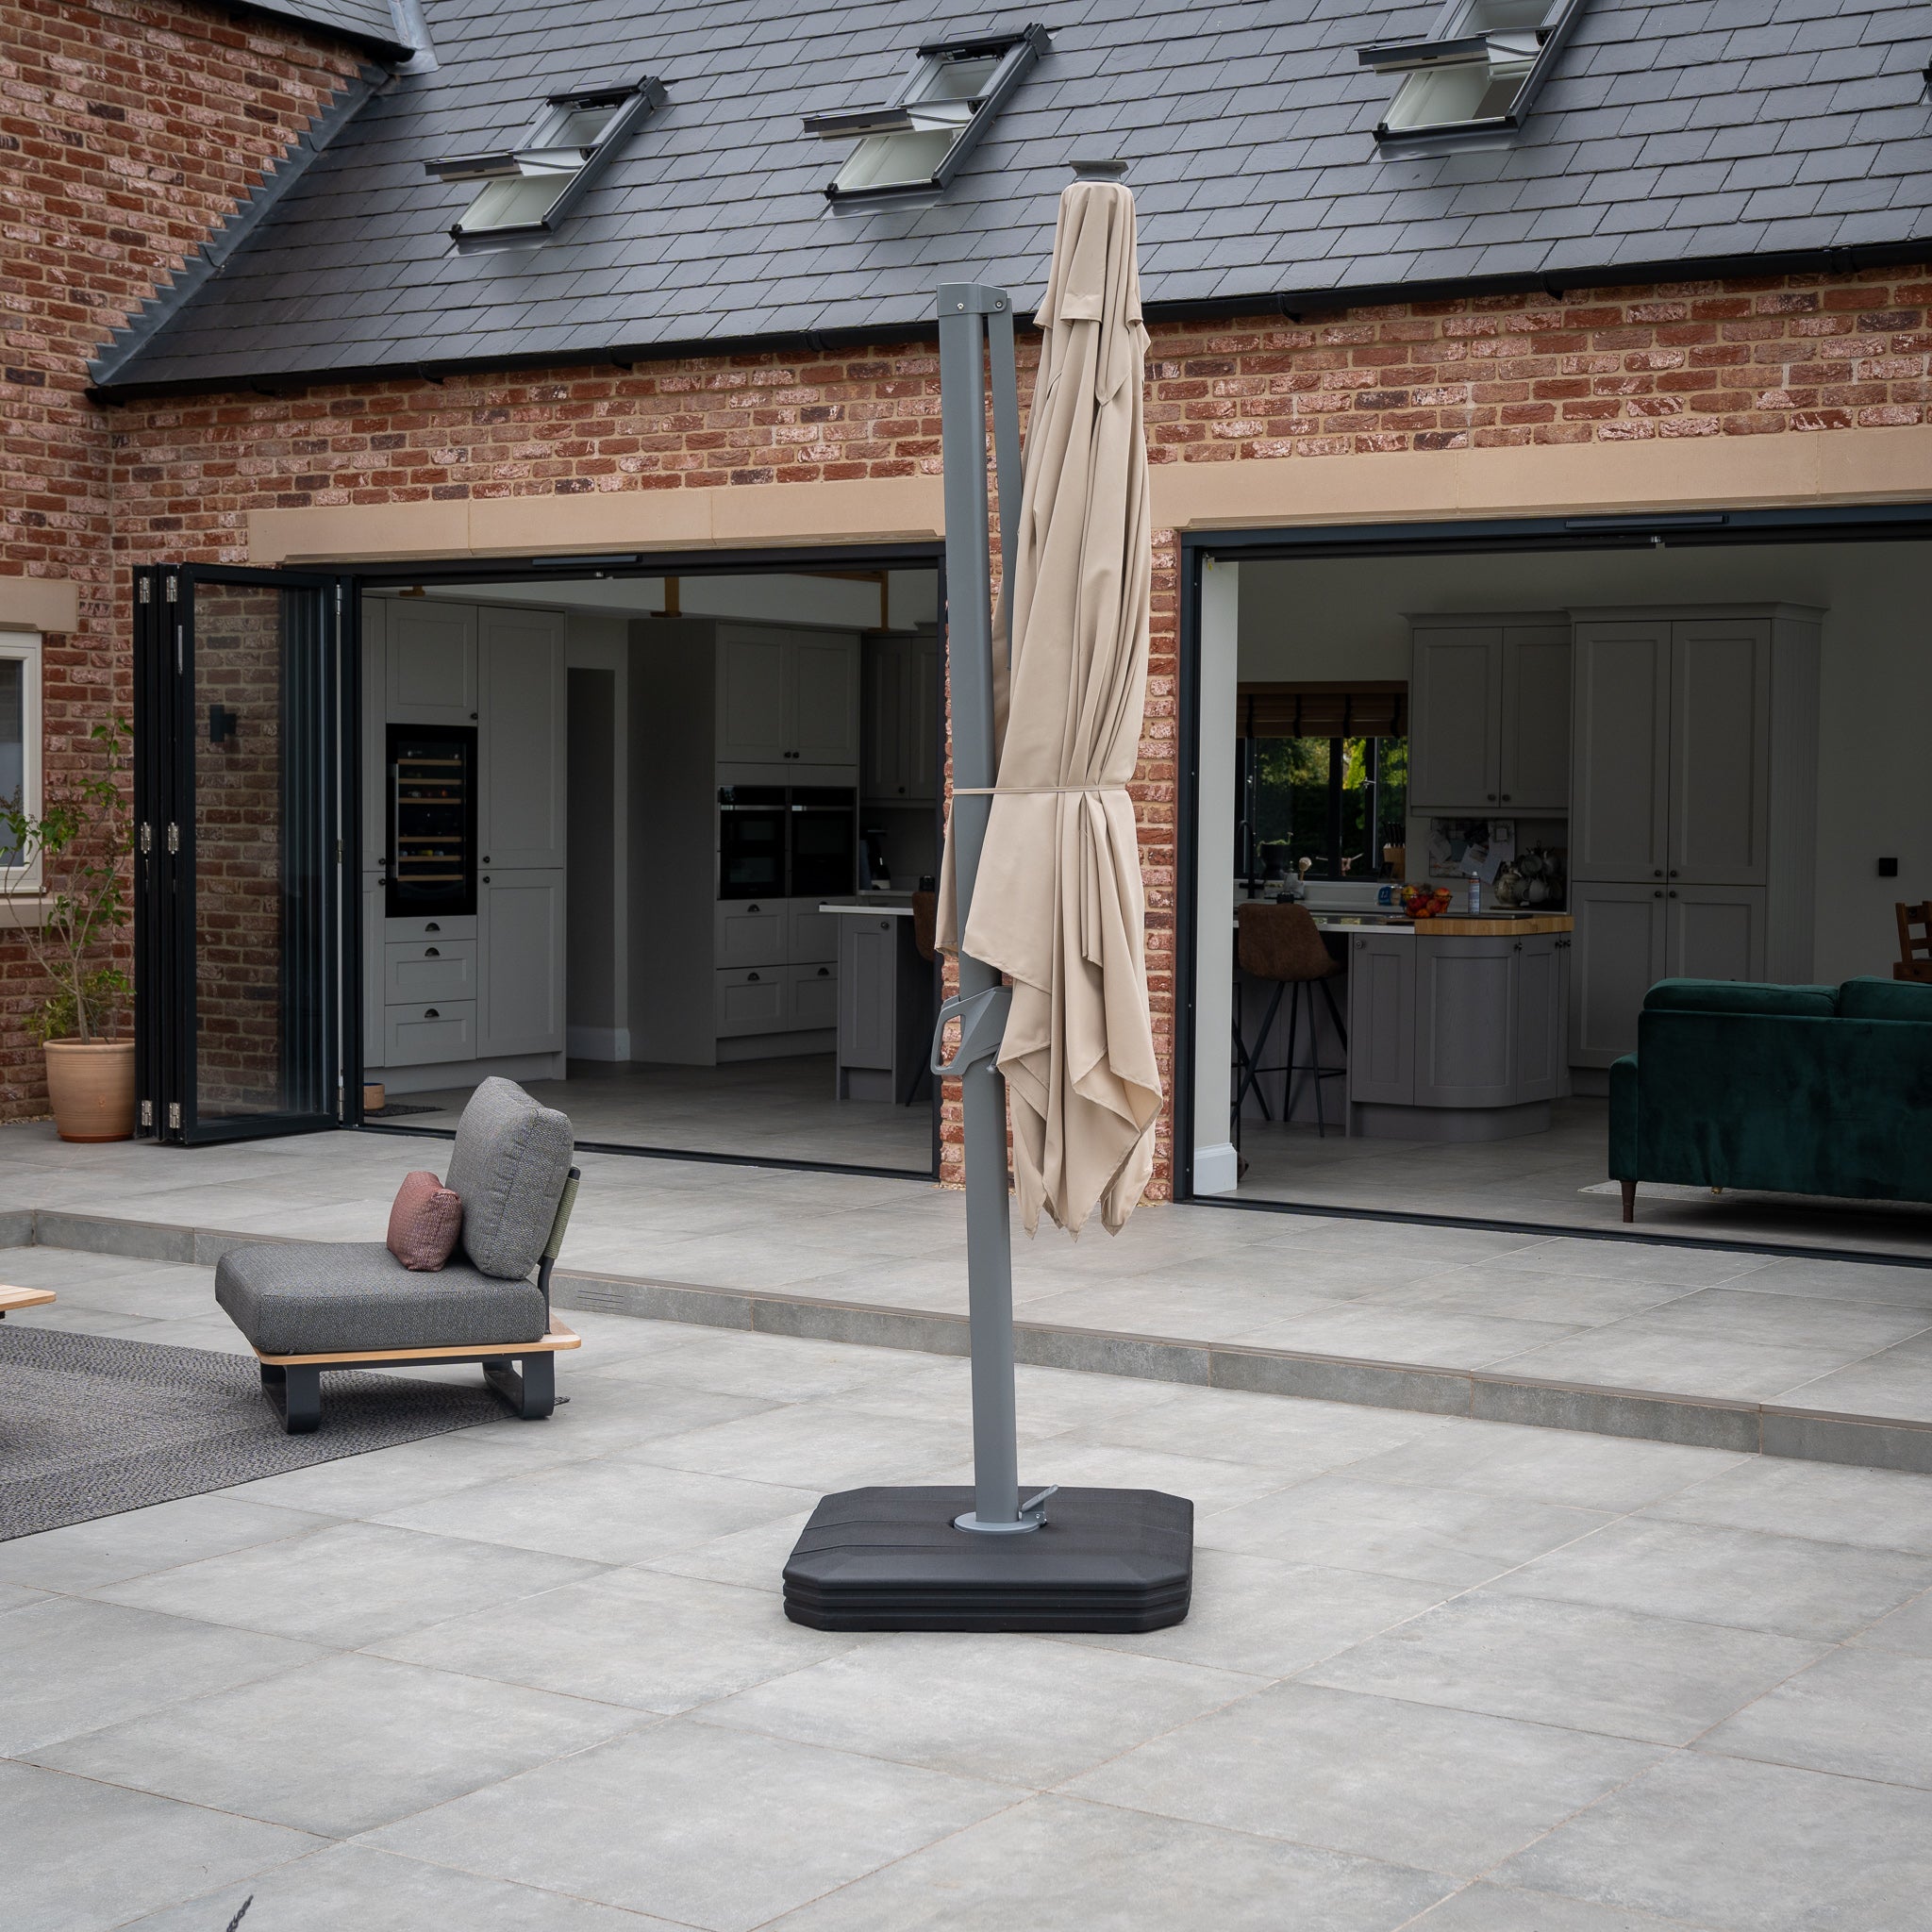 Ares 3m Square Cantilever Parasol with Solar powered LED Lights in Beige